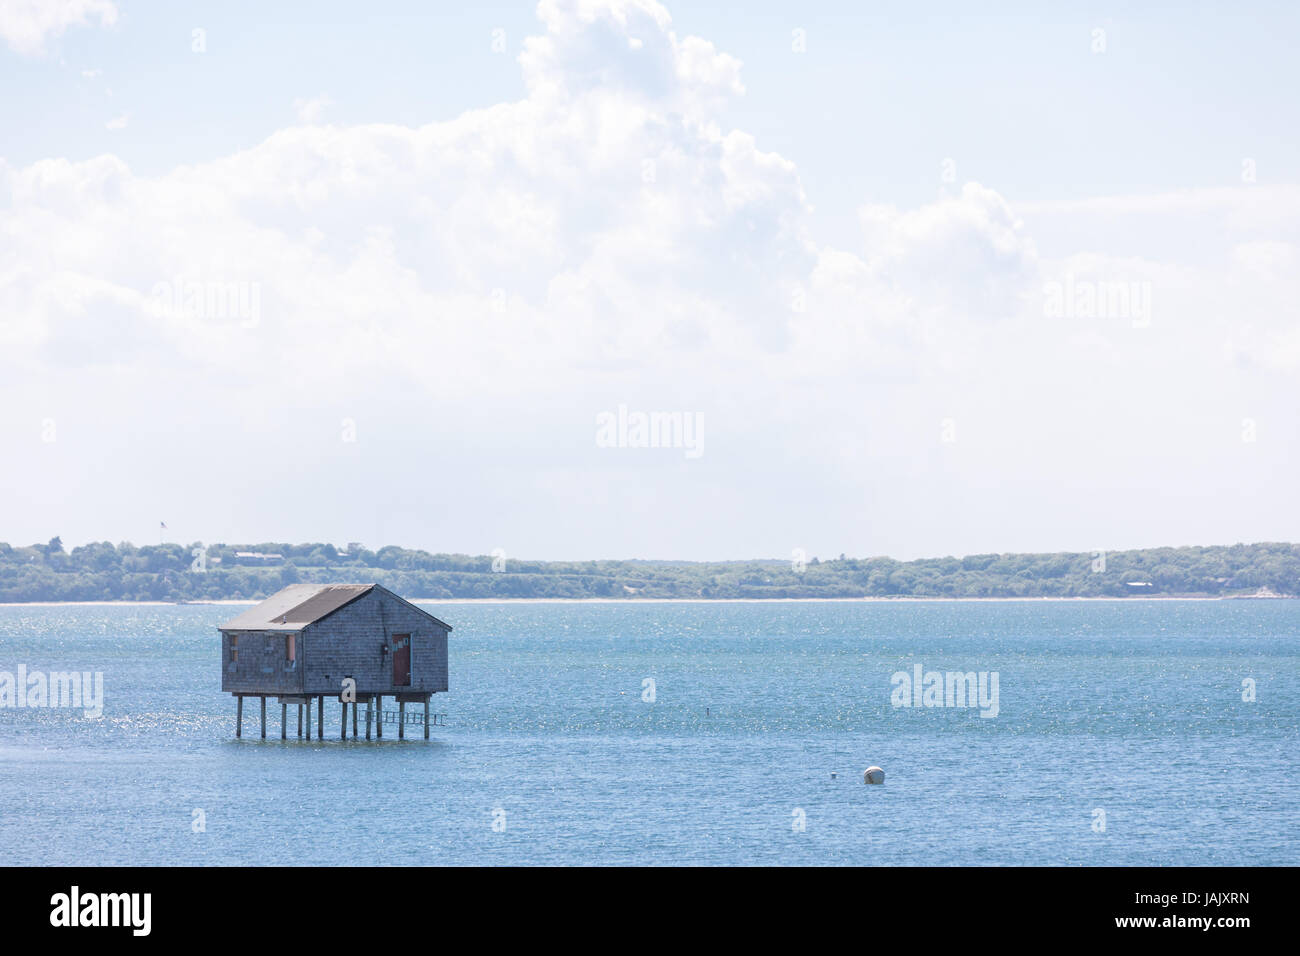 house on stilts in the water in eastern long island, ny Stock Photo